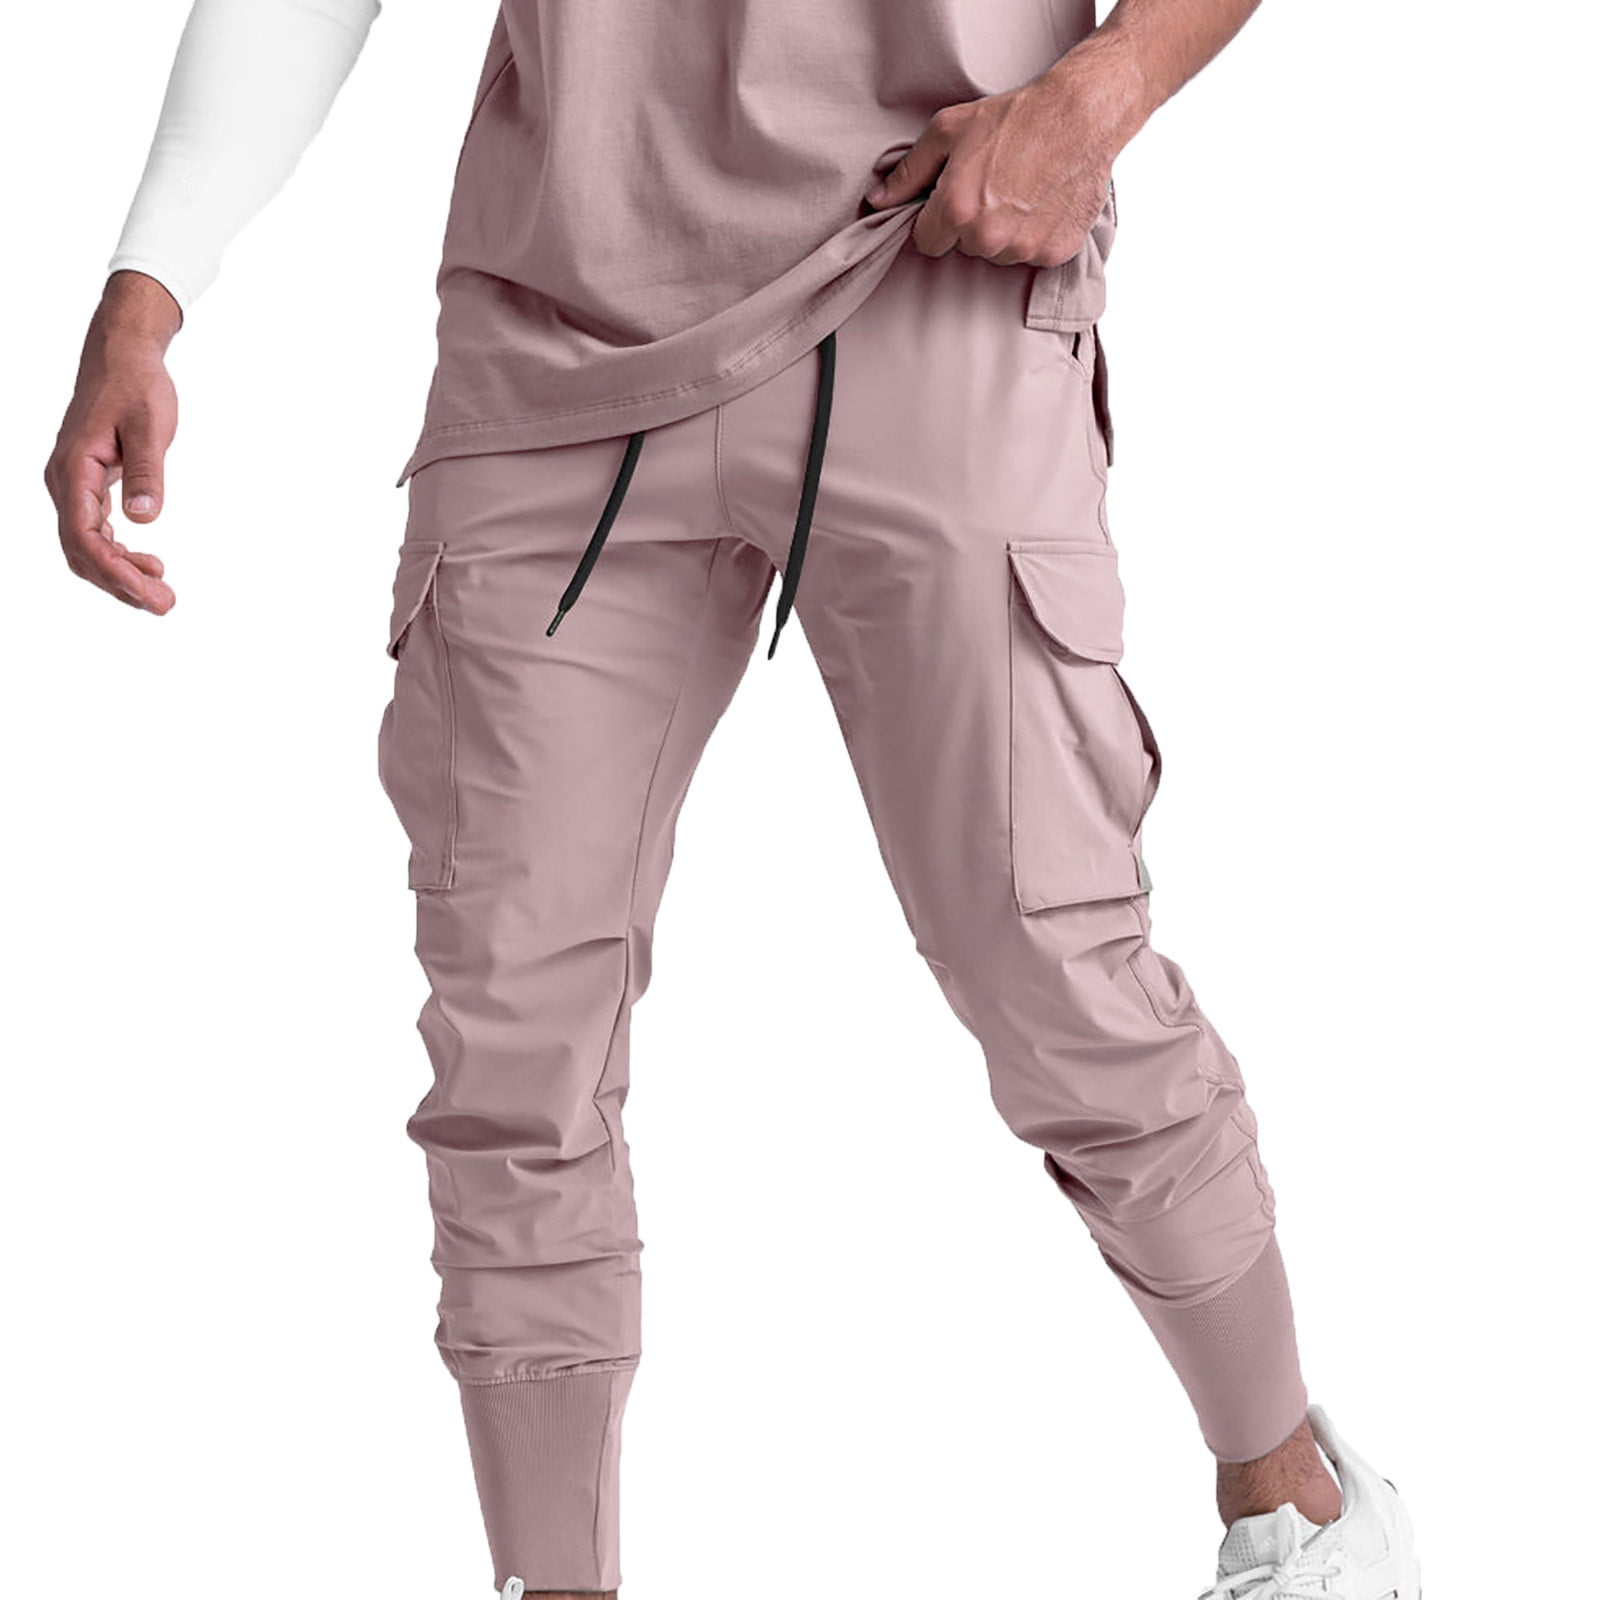 eczipvz Gifts for Men Men's Gym Jogger Pants Casual Workout Track Pants  Running SweatPants with Zipper Pockets Pink,3XL